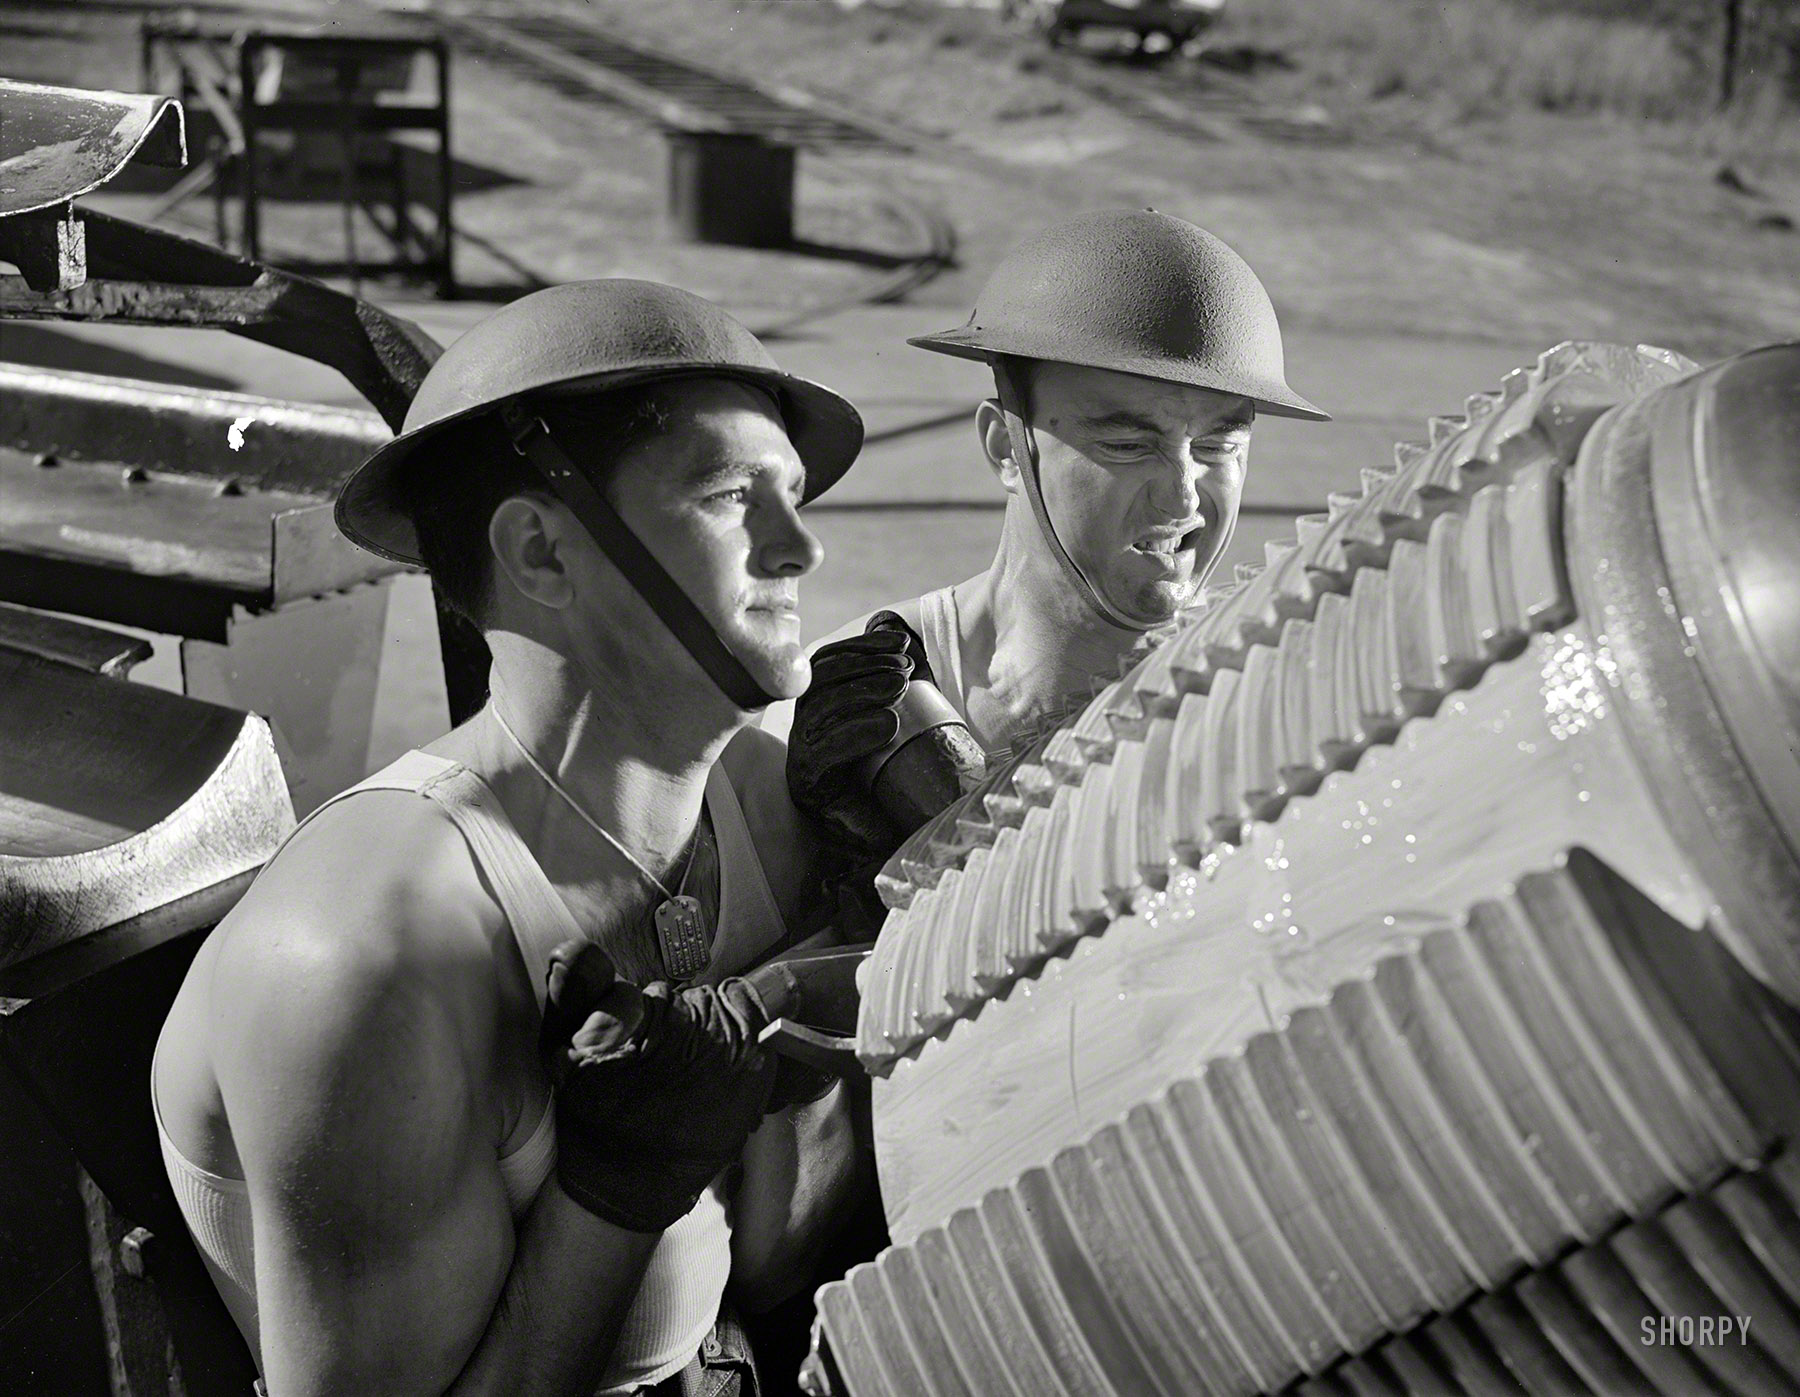 March 1942. Virginia Beach, Va. "Fort Story coast defense. A tough job for soldiers is shoving the breech block of the giant howitzer into place. The screw threads help the block to withstand millions of foot-pounds of pressure caused by the exploding charge." Photo by Alfred Palmer, Office of War Information. View full size.